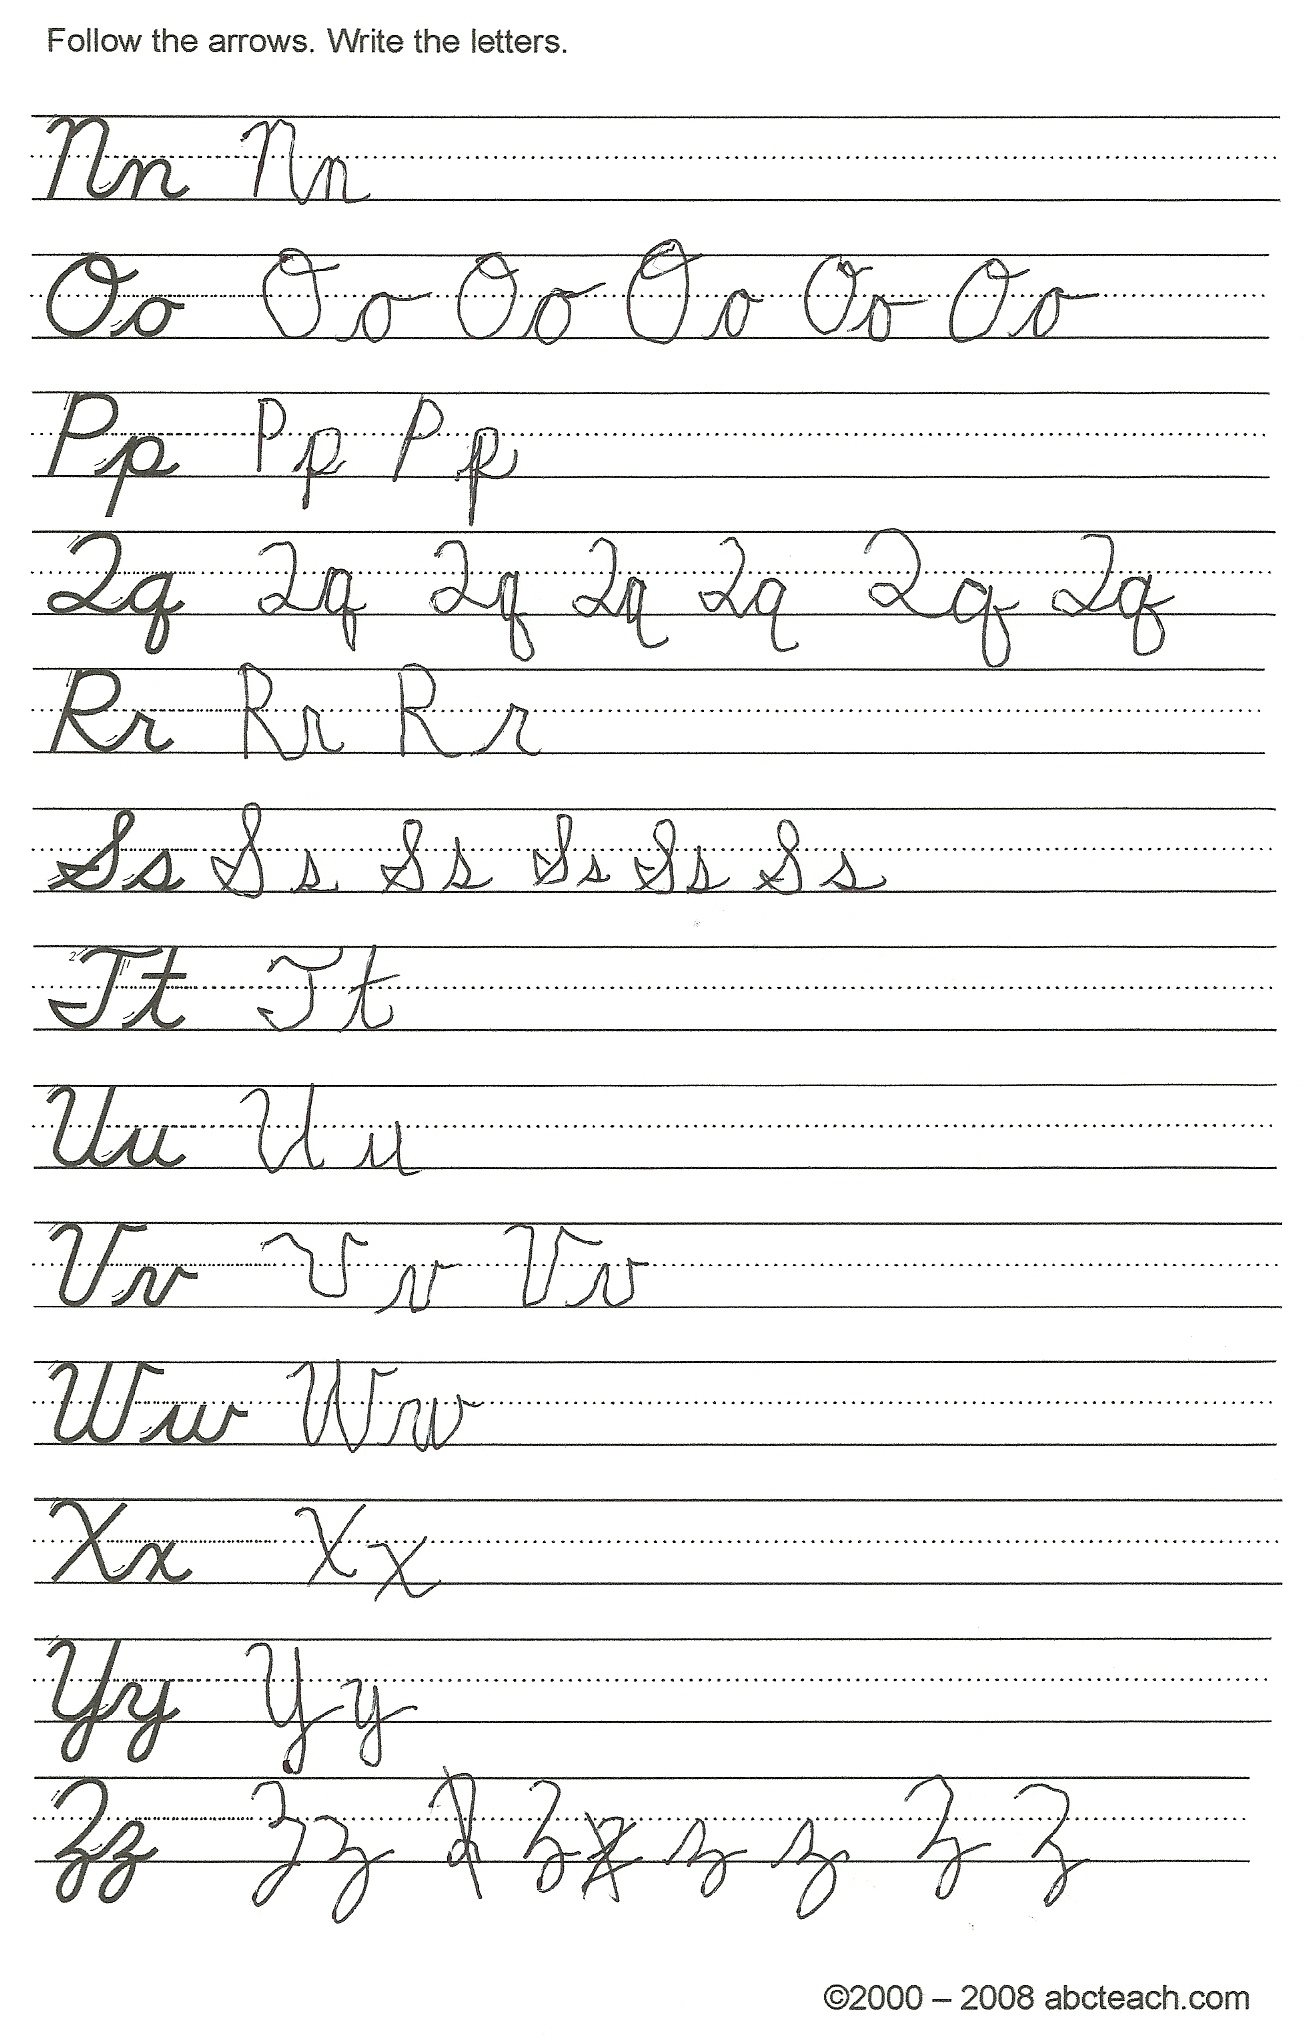 Cursive Handwriting Practice Worksheets For Adults Download Printable 